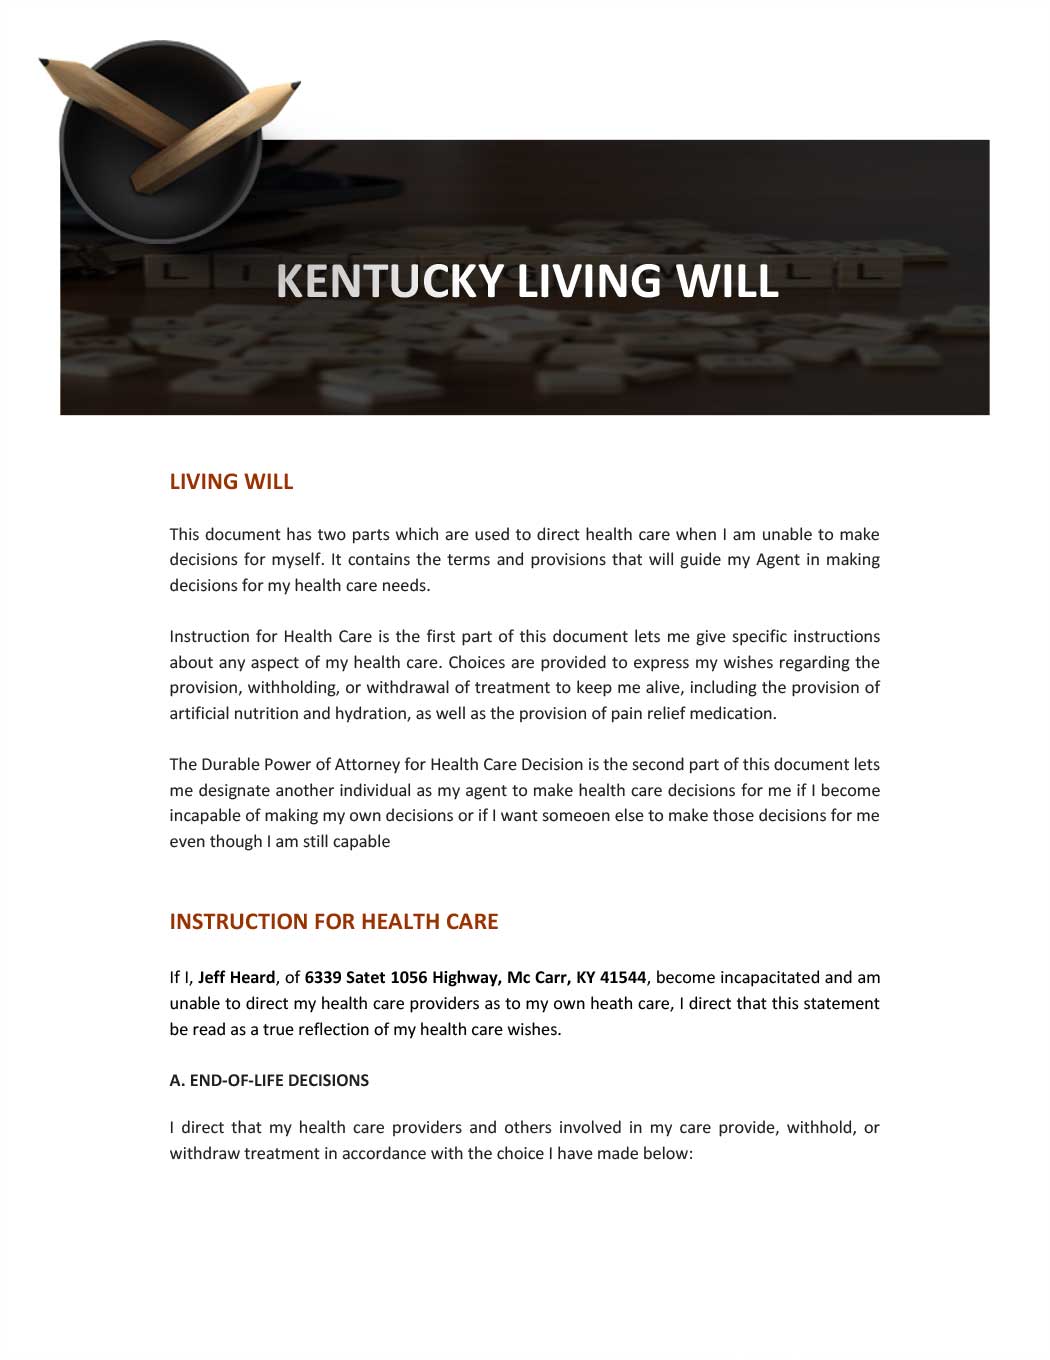 Kentucky Living Will Template Download in Word, Google Docs